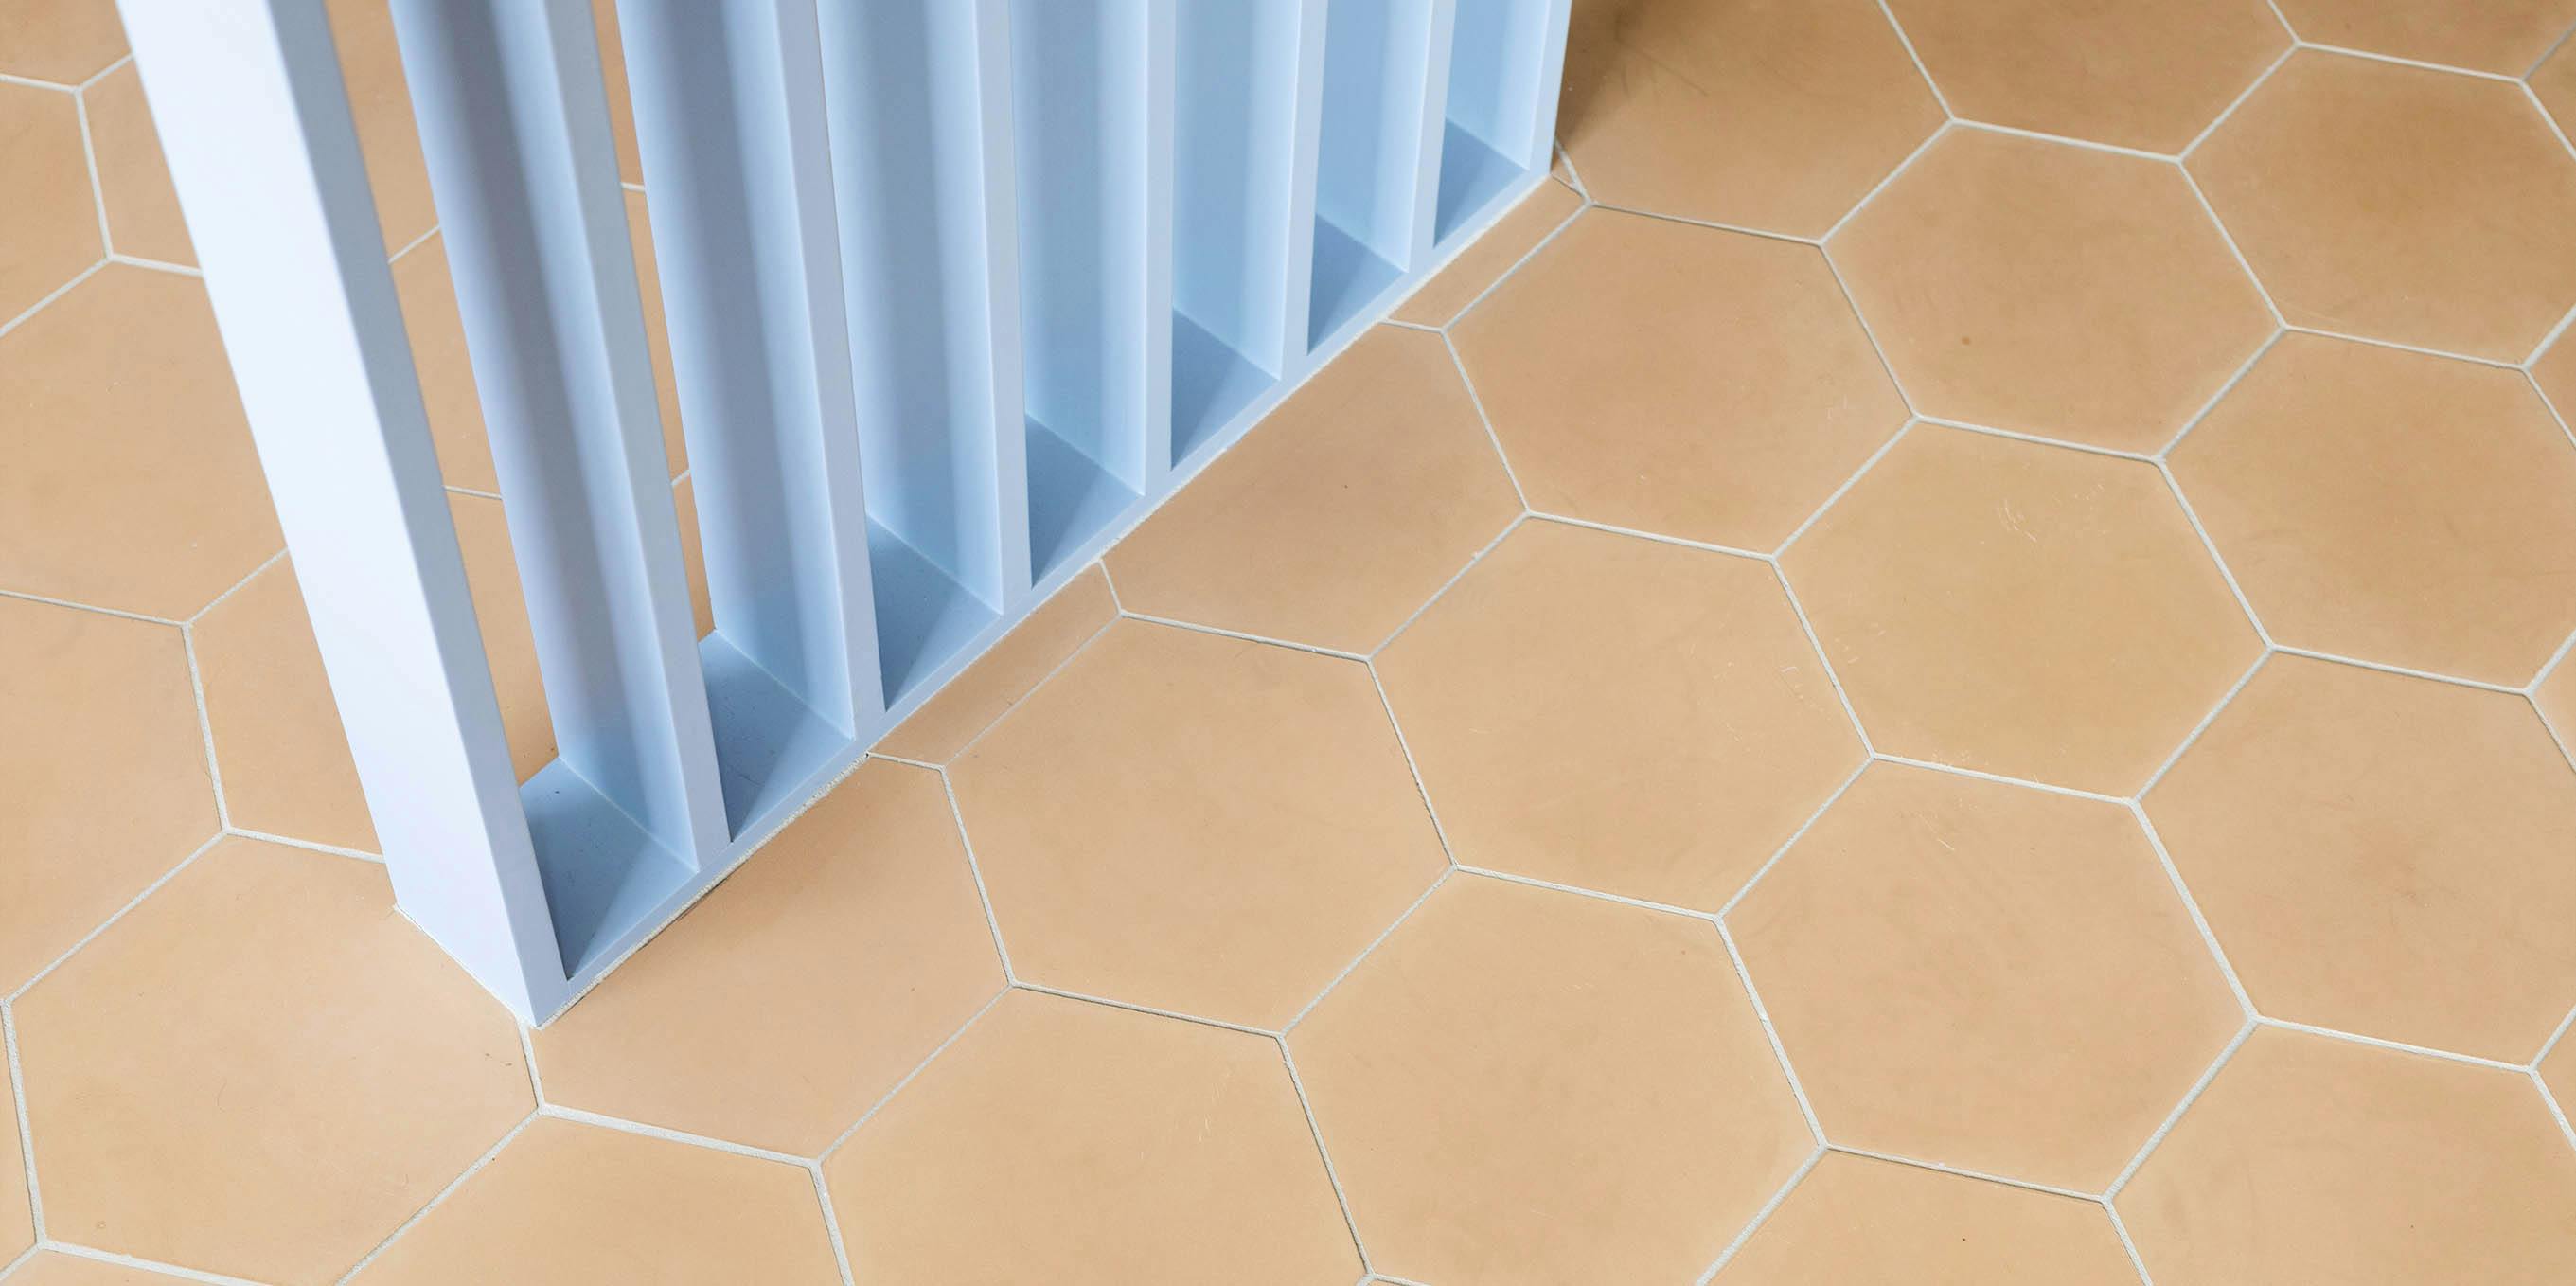 Cement Tile: Hex collection featured image.